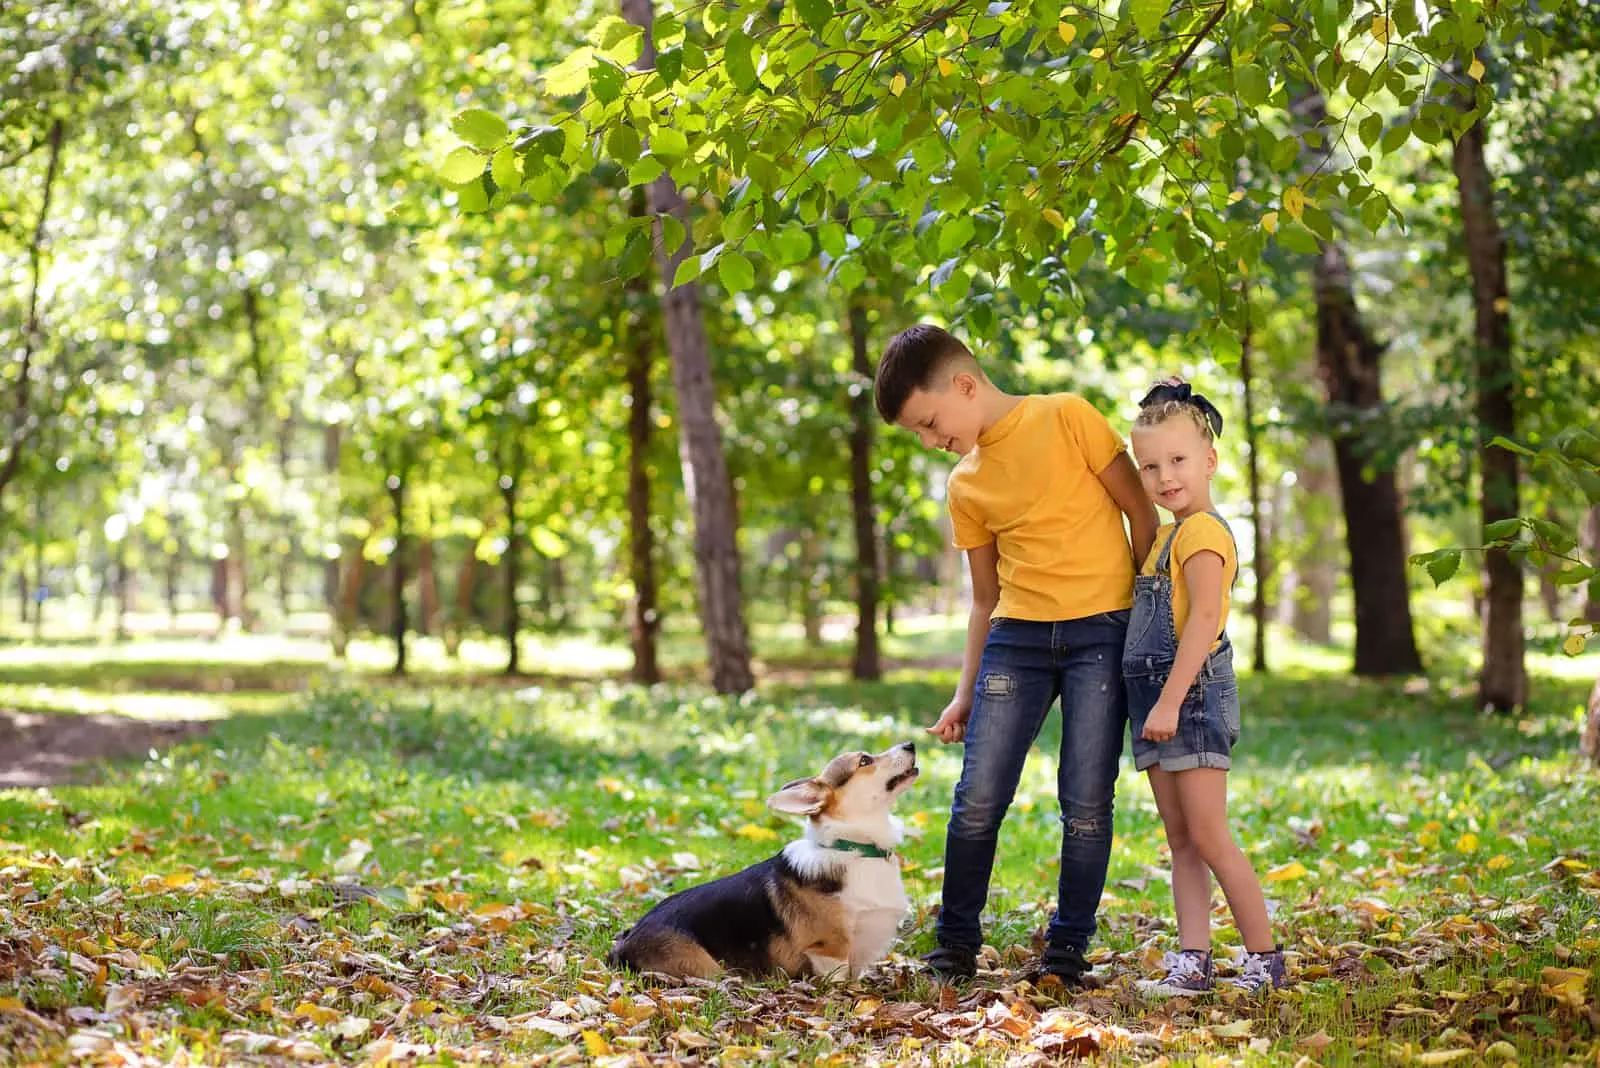 the kids are having fun with Corgi in the park